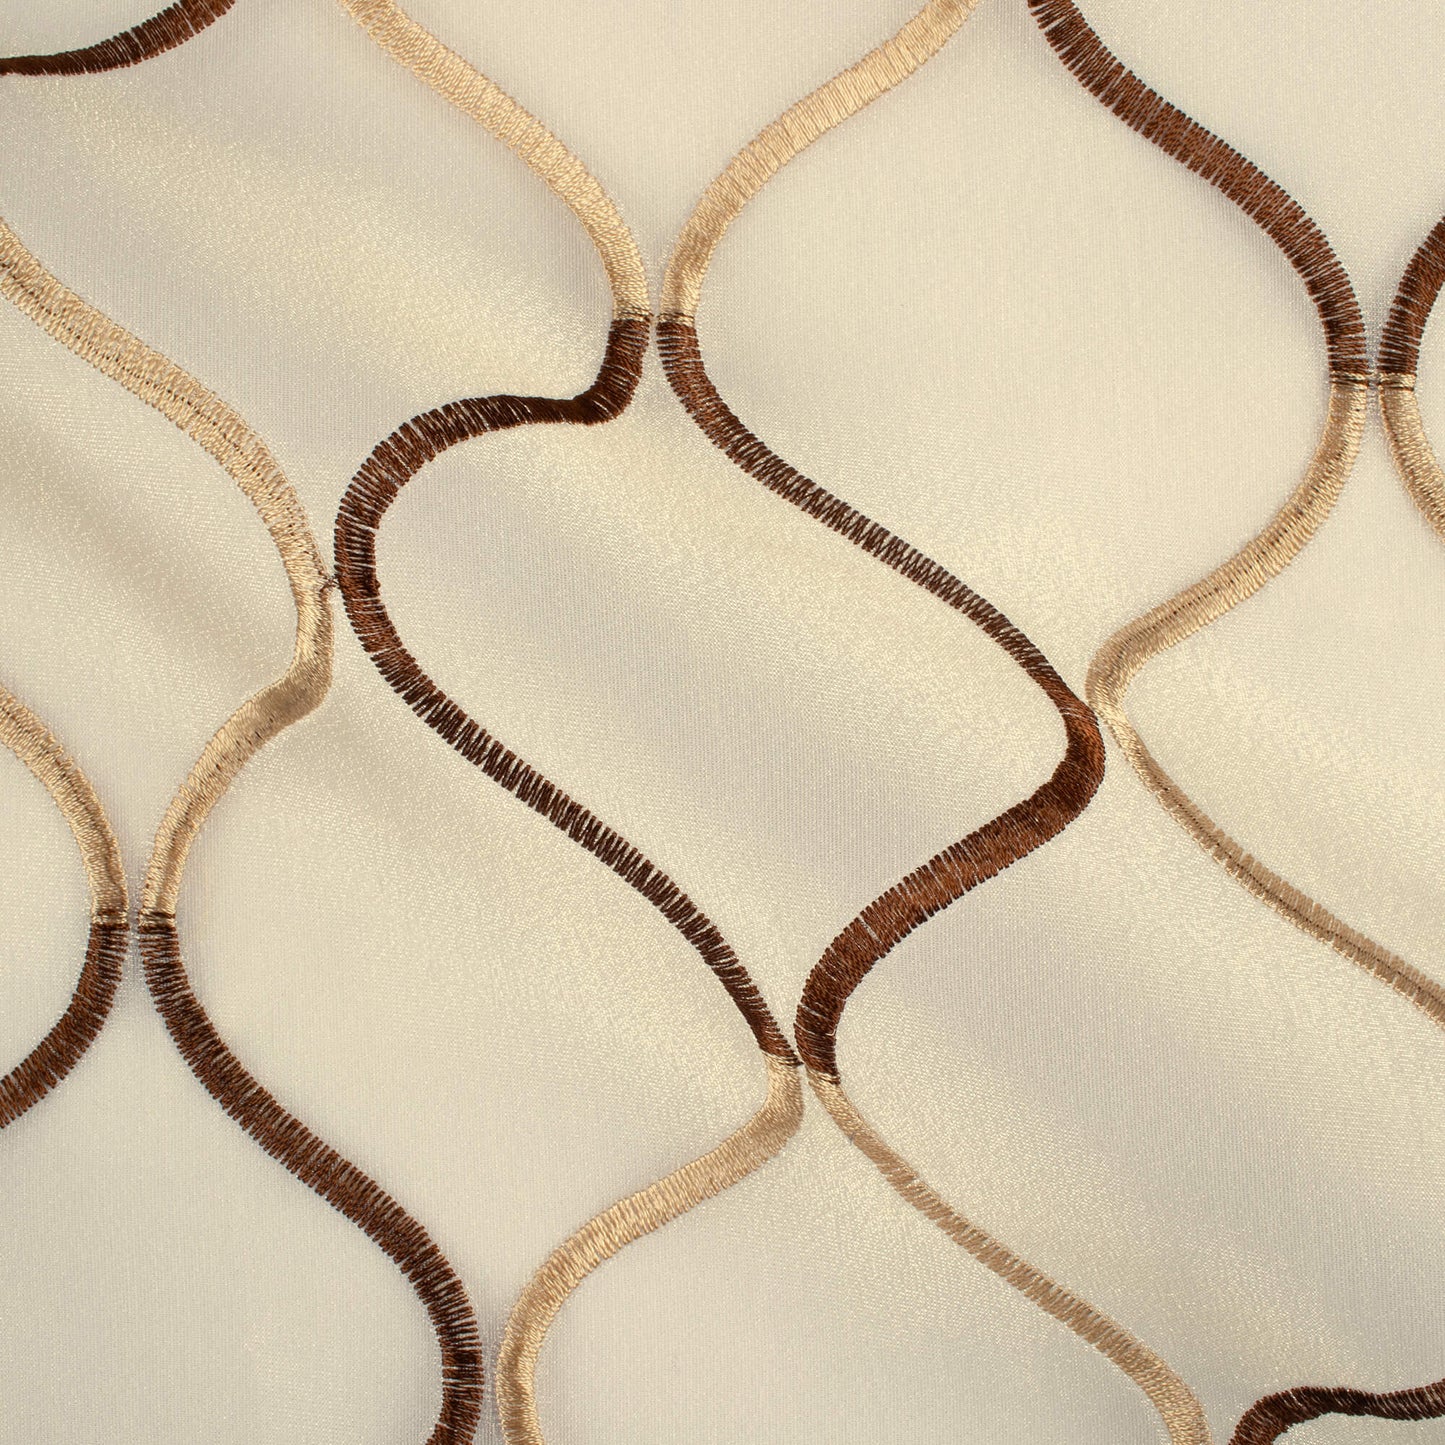 Oatmeal Beige And Coffee Brown Trellis Pattern Embroidery Organza Tissue Premium Sheer Fabric (Width 48 Inches)